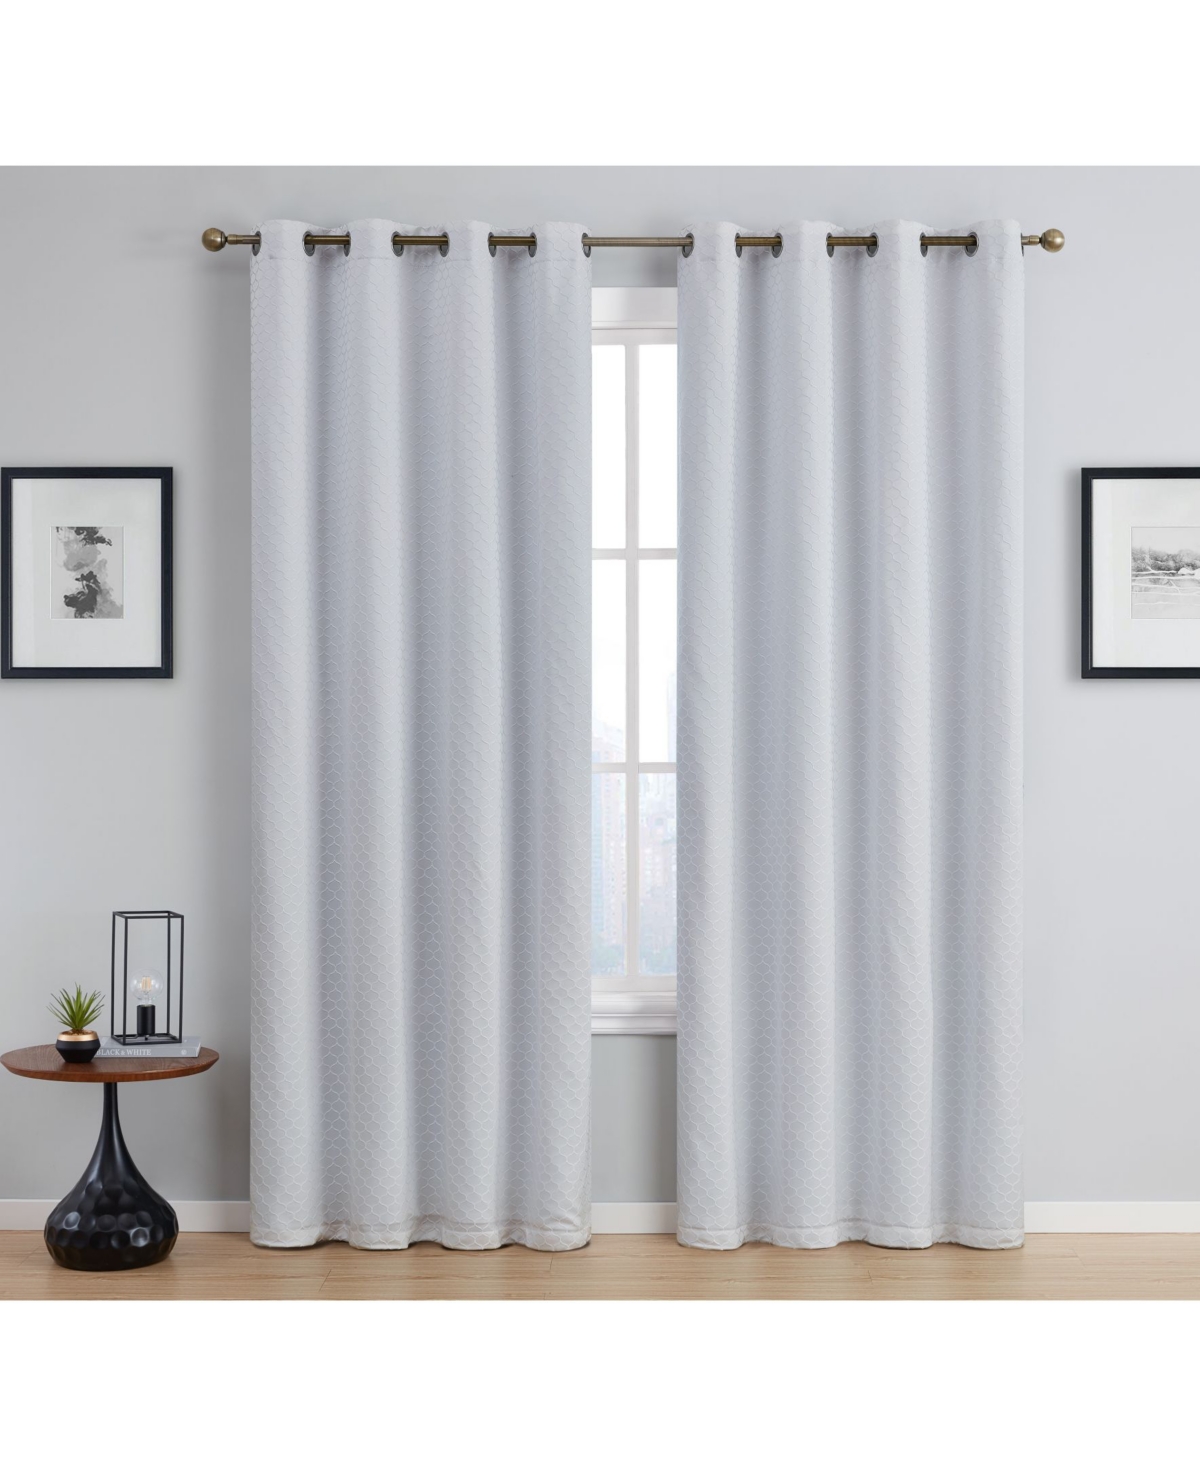 Siena Pattern 100% Complete Blackout Thermal Insulated Double Layer Window Curtain Grommet Panels for Living Room & Bedroom - Energy Savings &